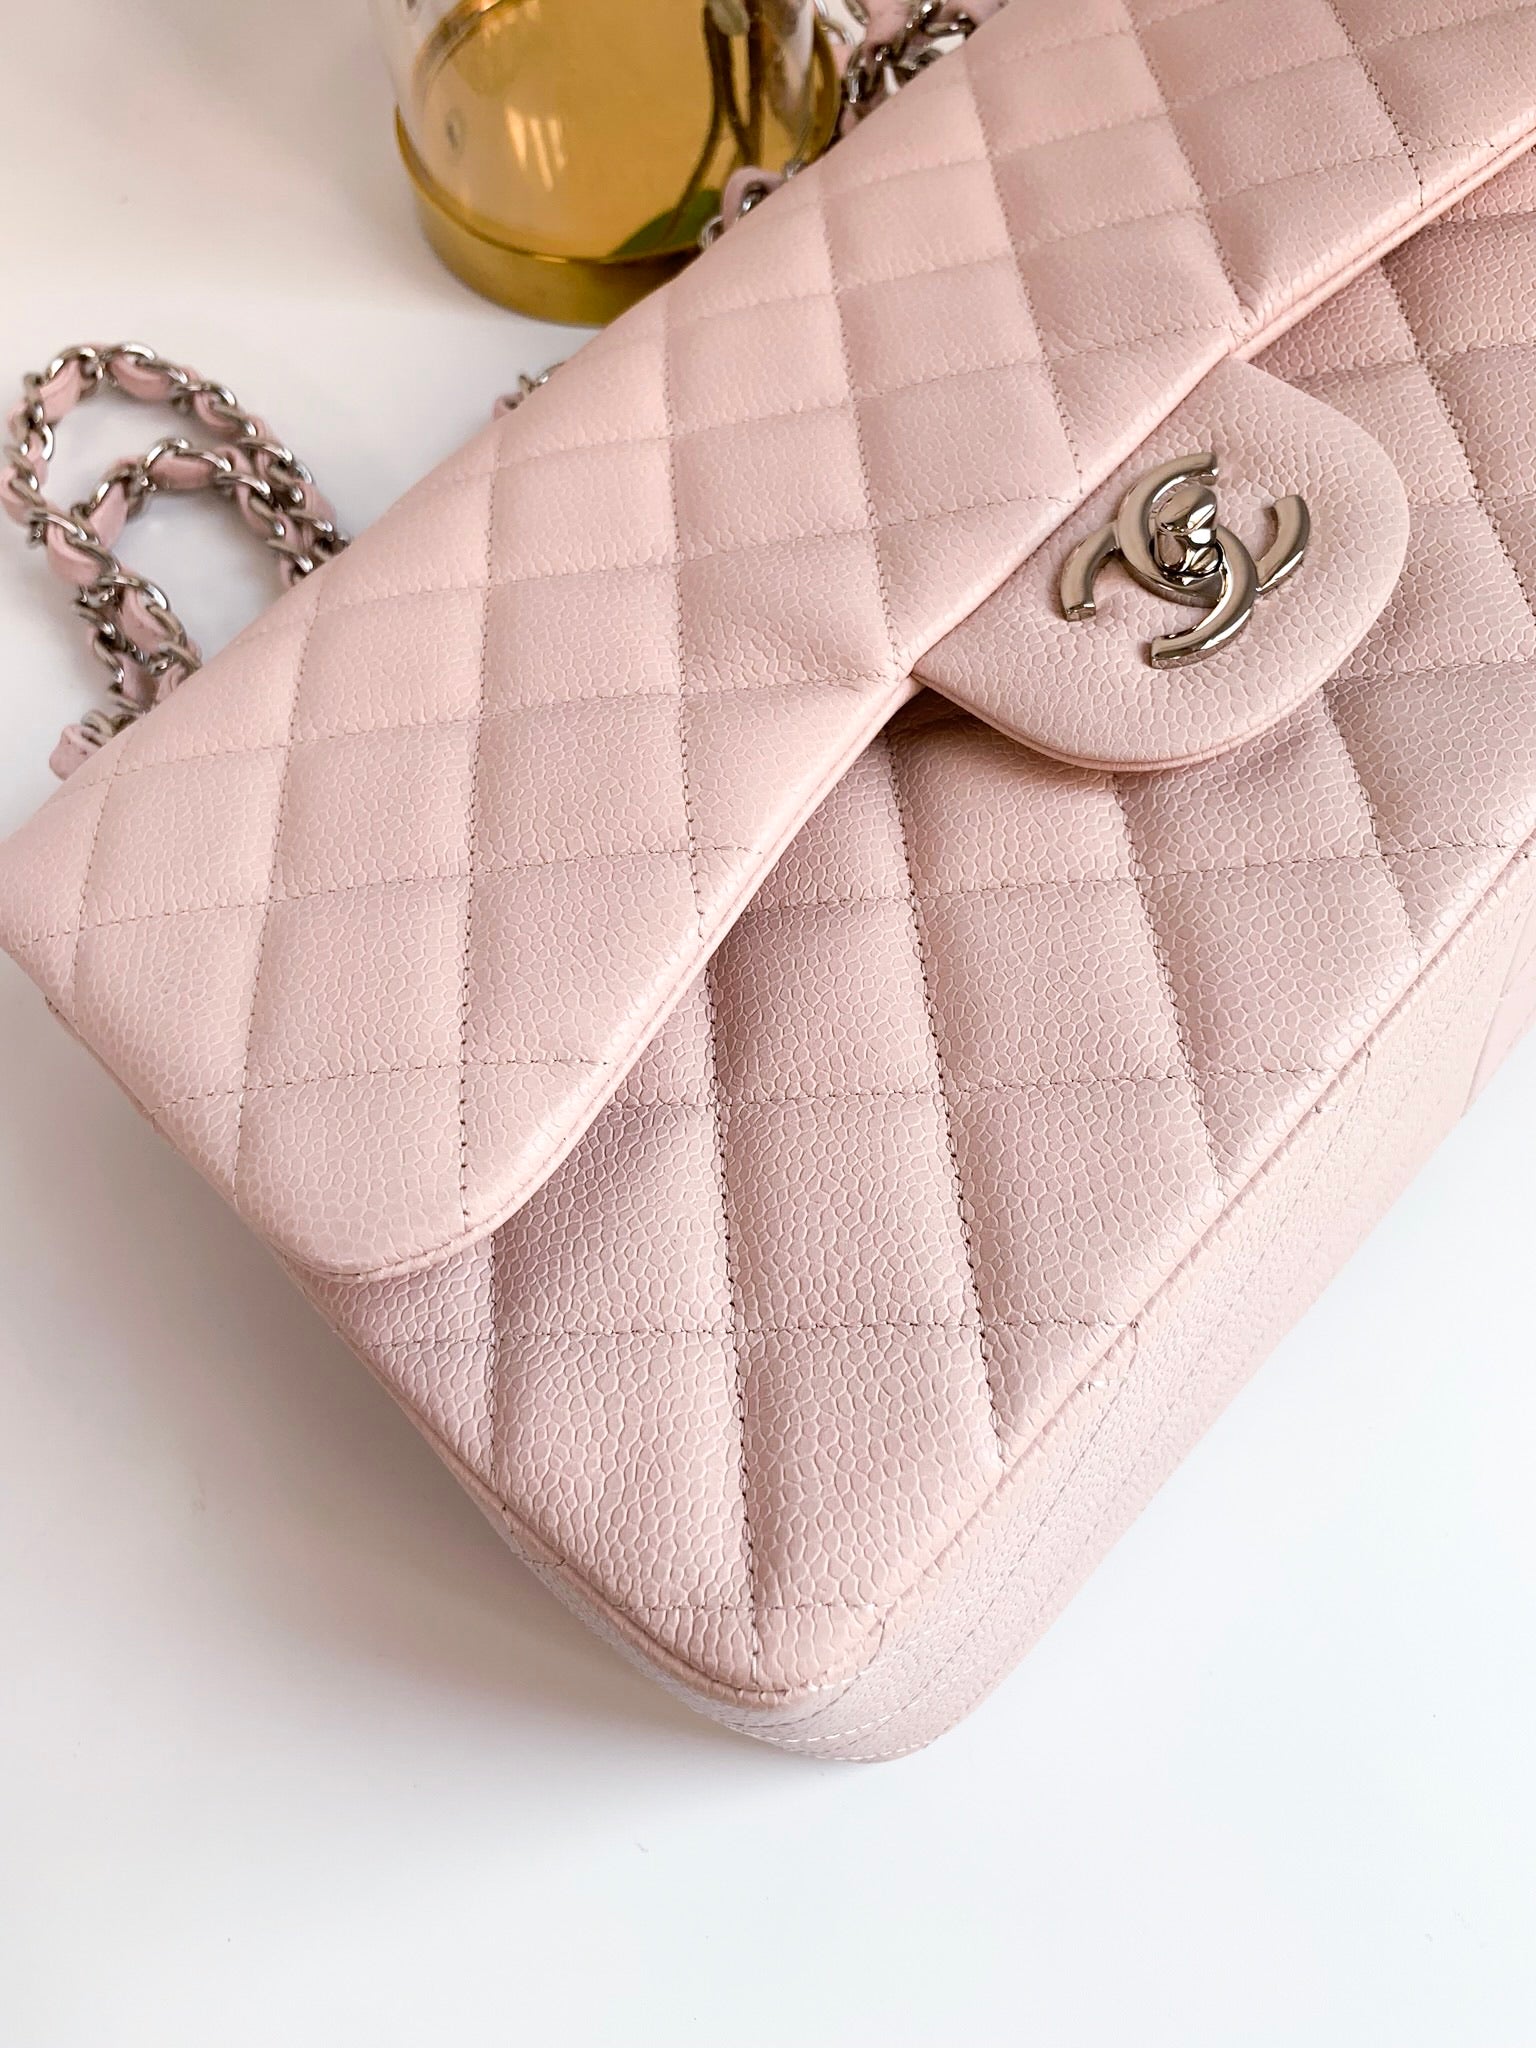 Chanel Quilted Vintage Mini Square Flap Pink Caviar Silver Hardware – Coco  Approved Studio